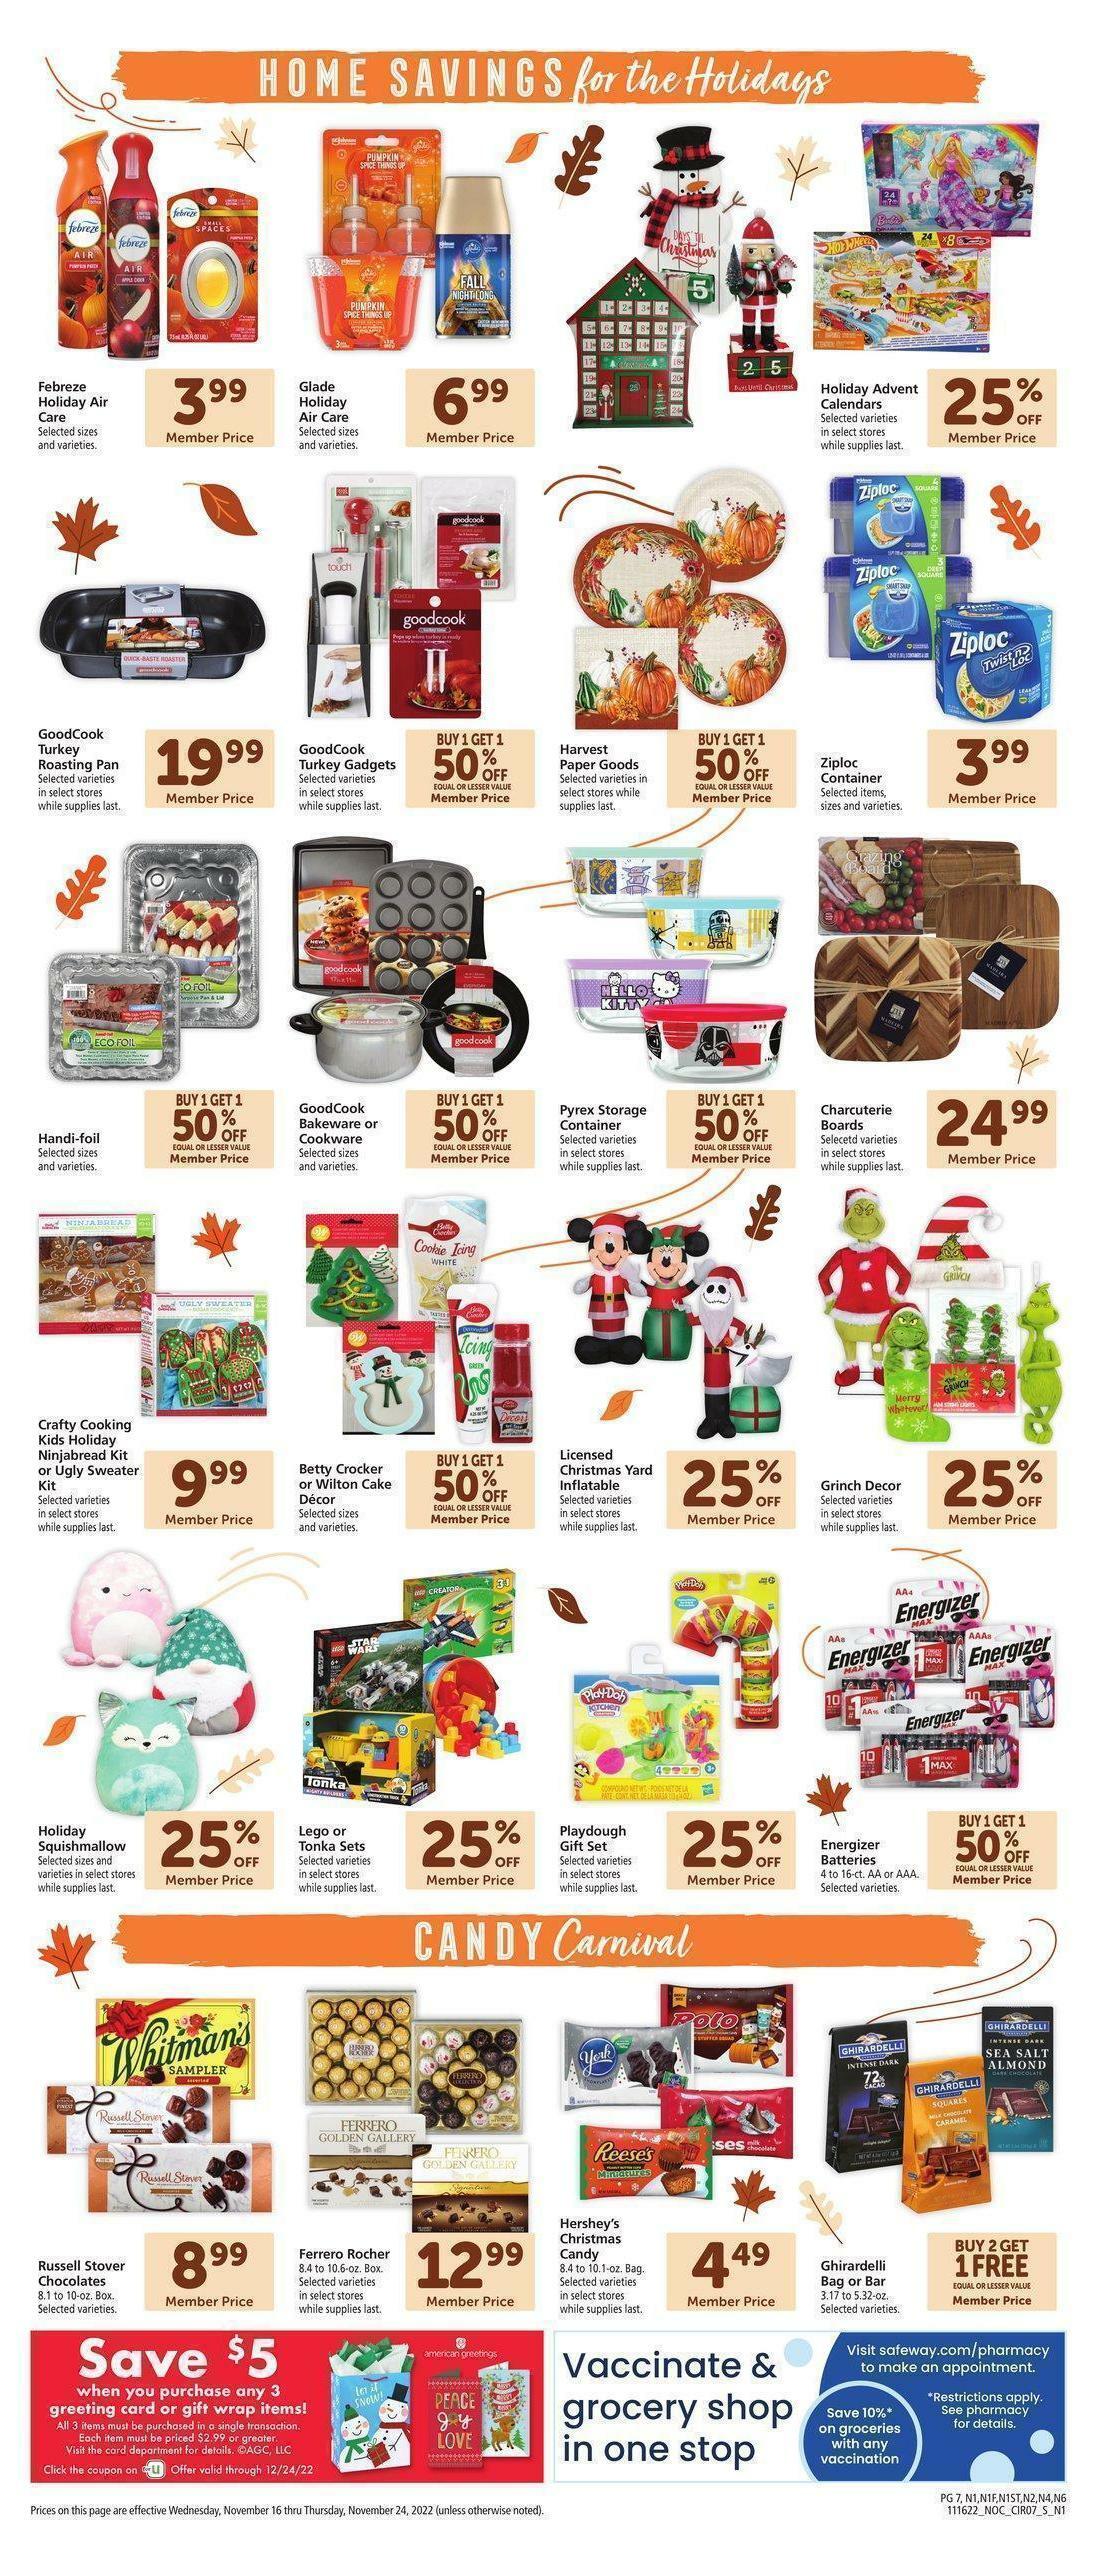 Safeway Weekly Ad from November 16